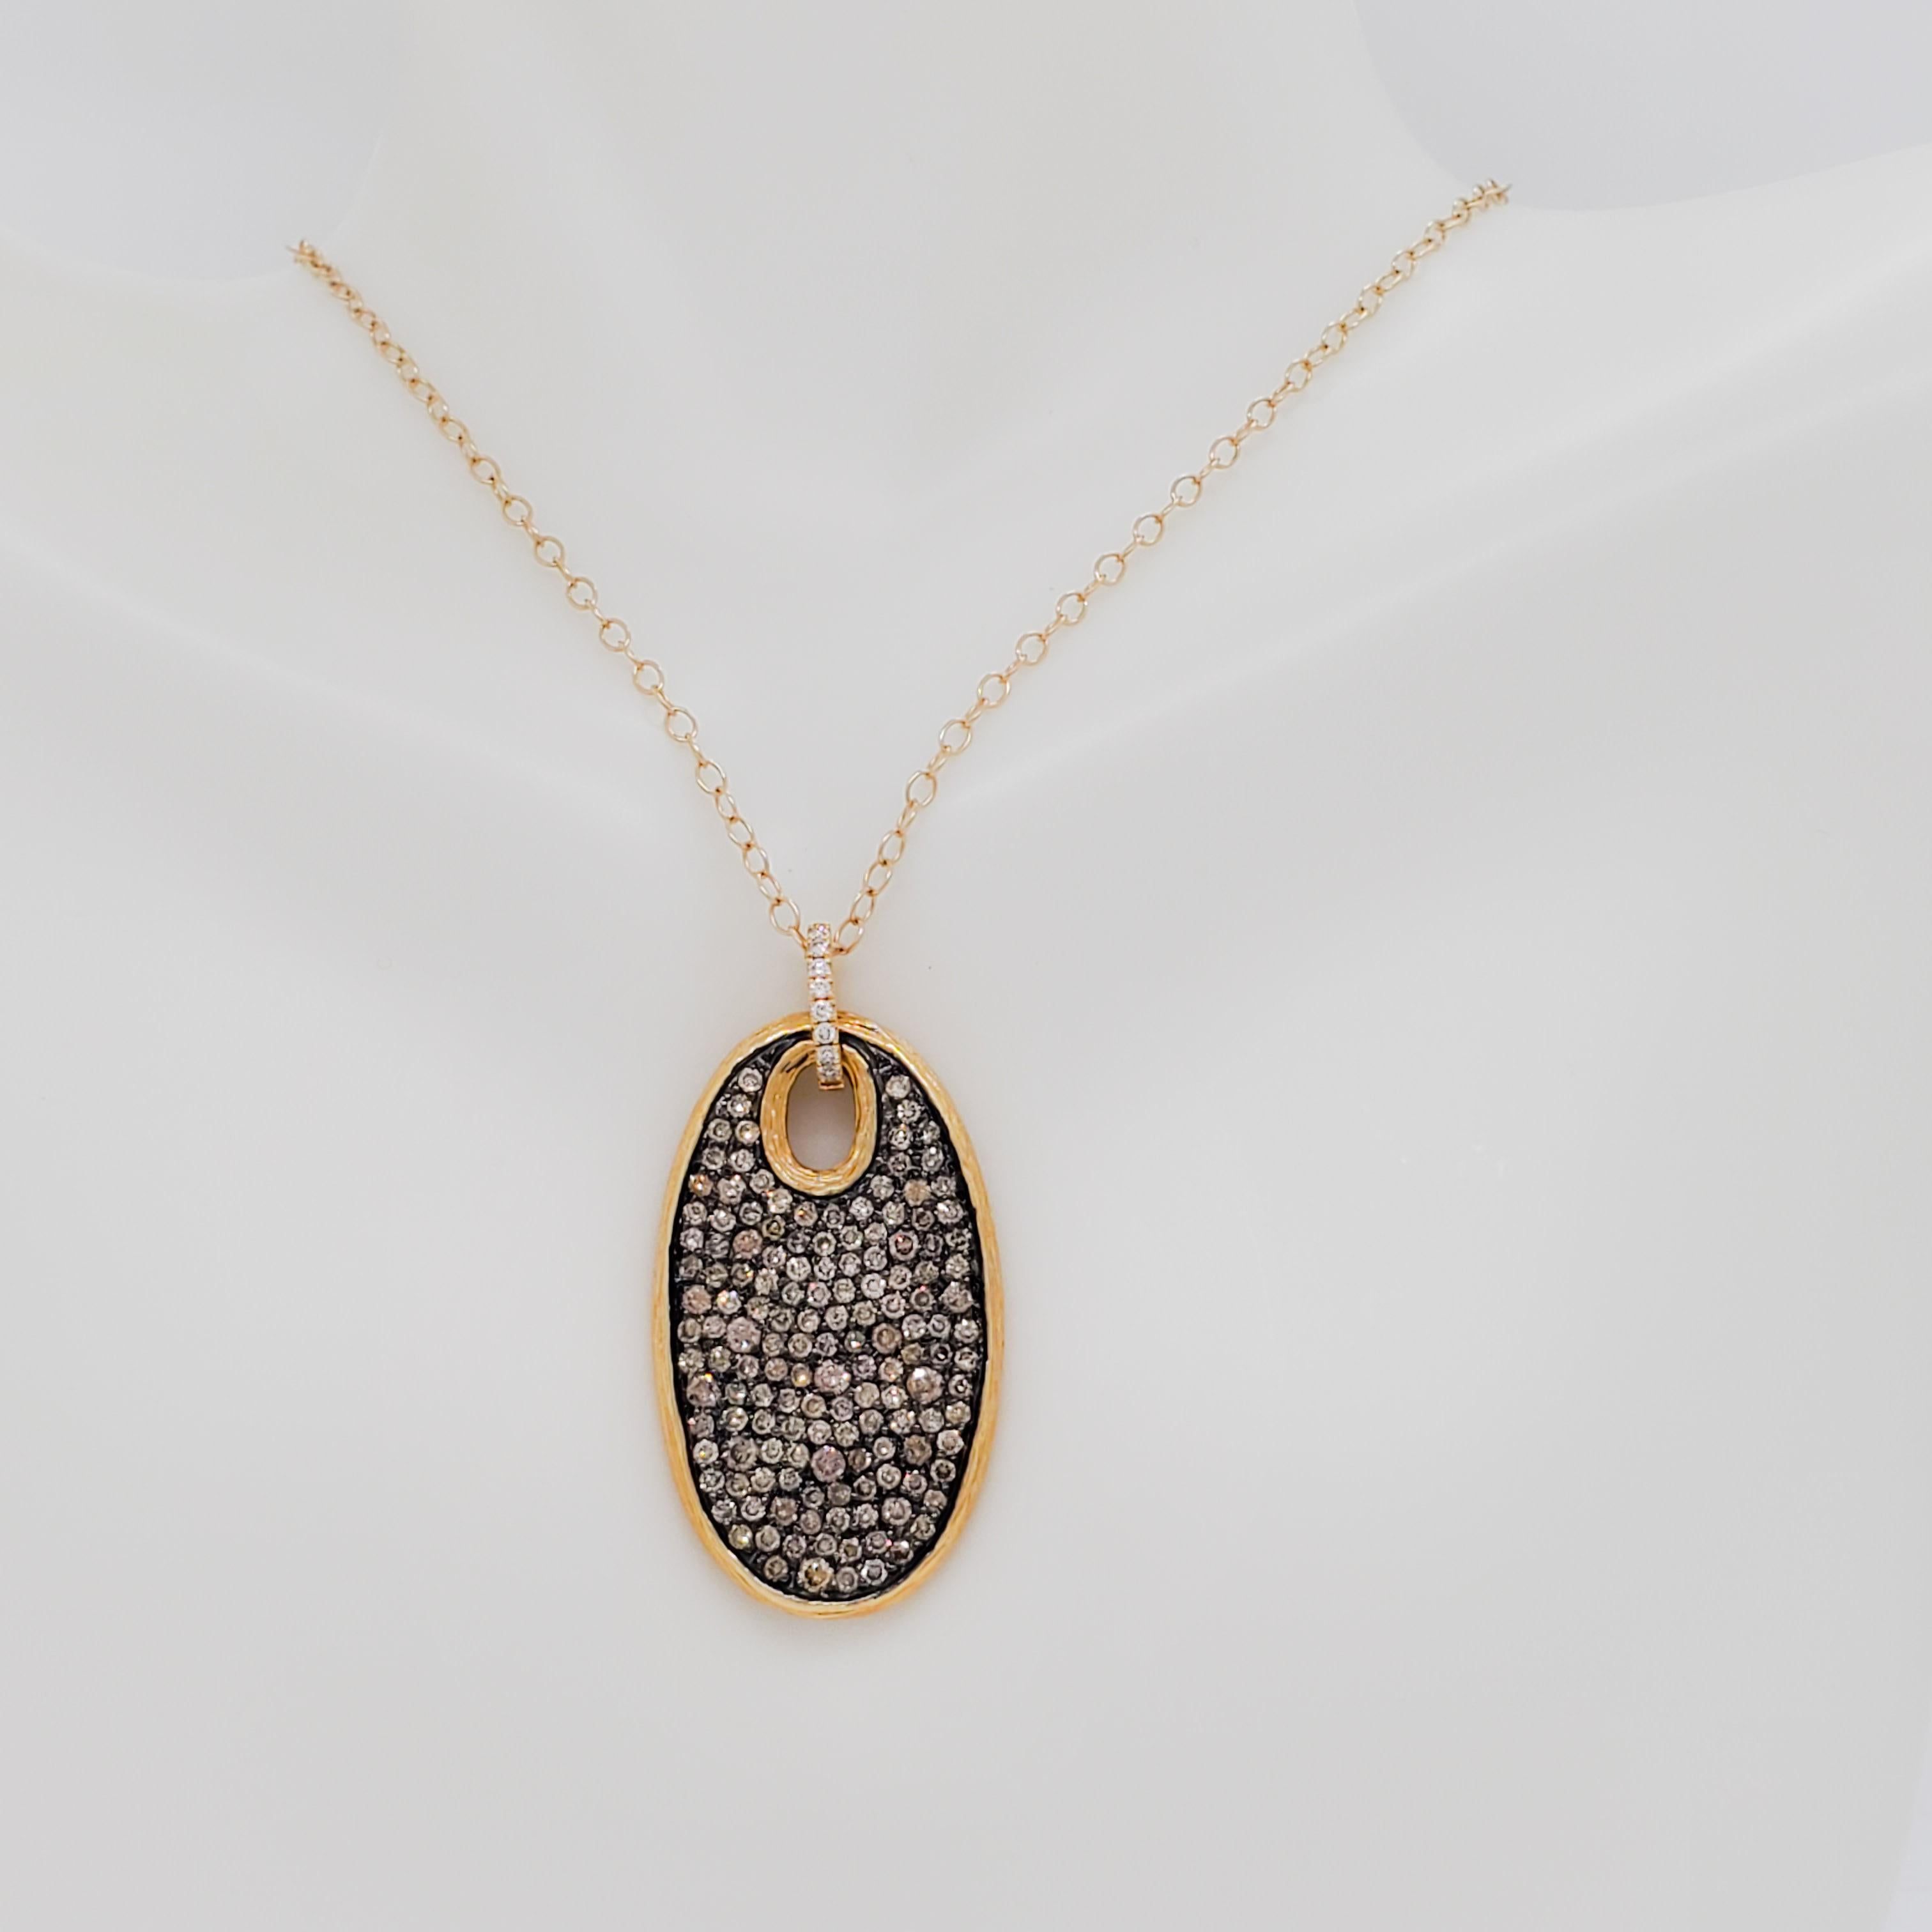 Gorgeous pendant necklace featuring 2.19 ct. champagne and white good quality diamond rounds in a handmade 14k yellow gold mounting.  Length is 16